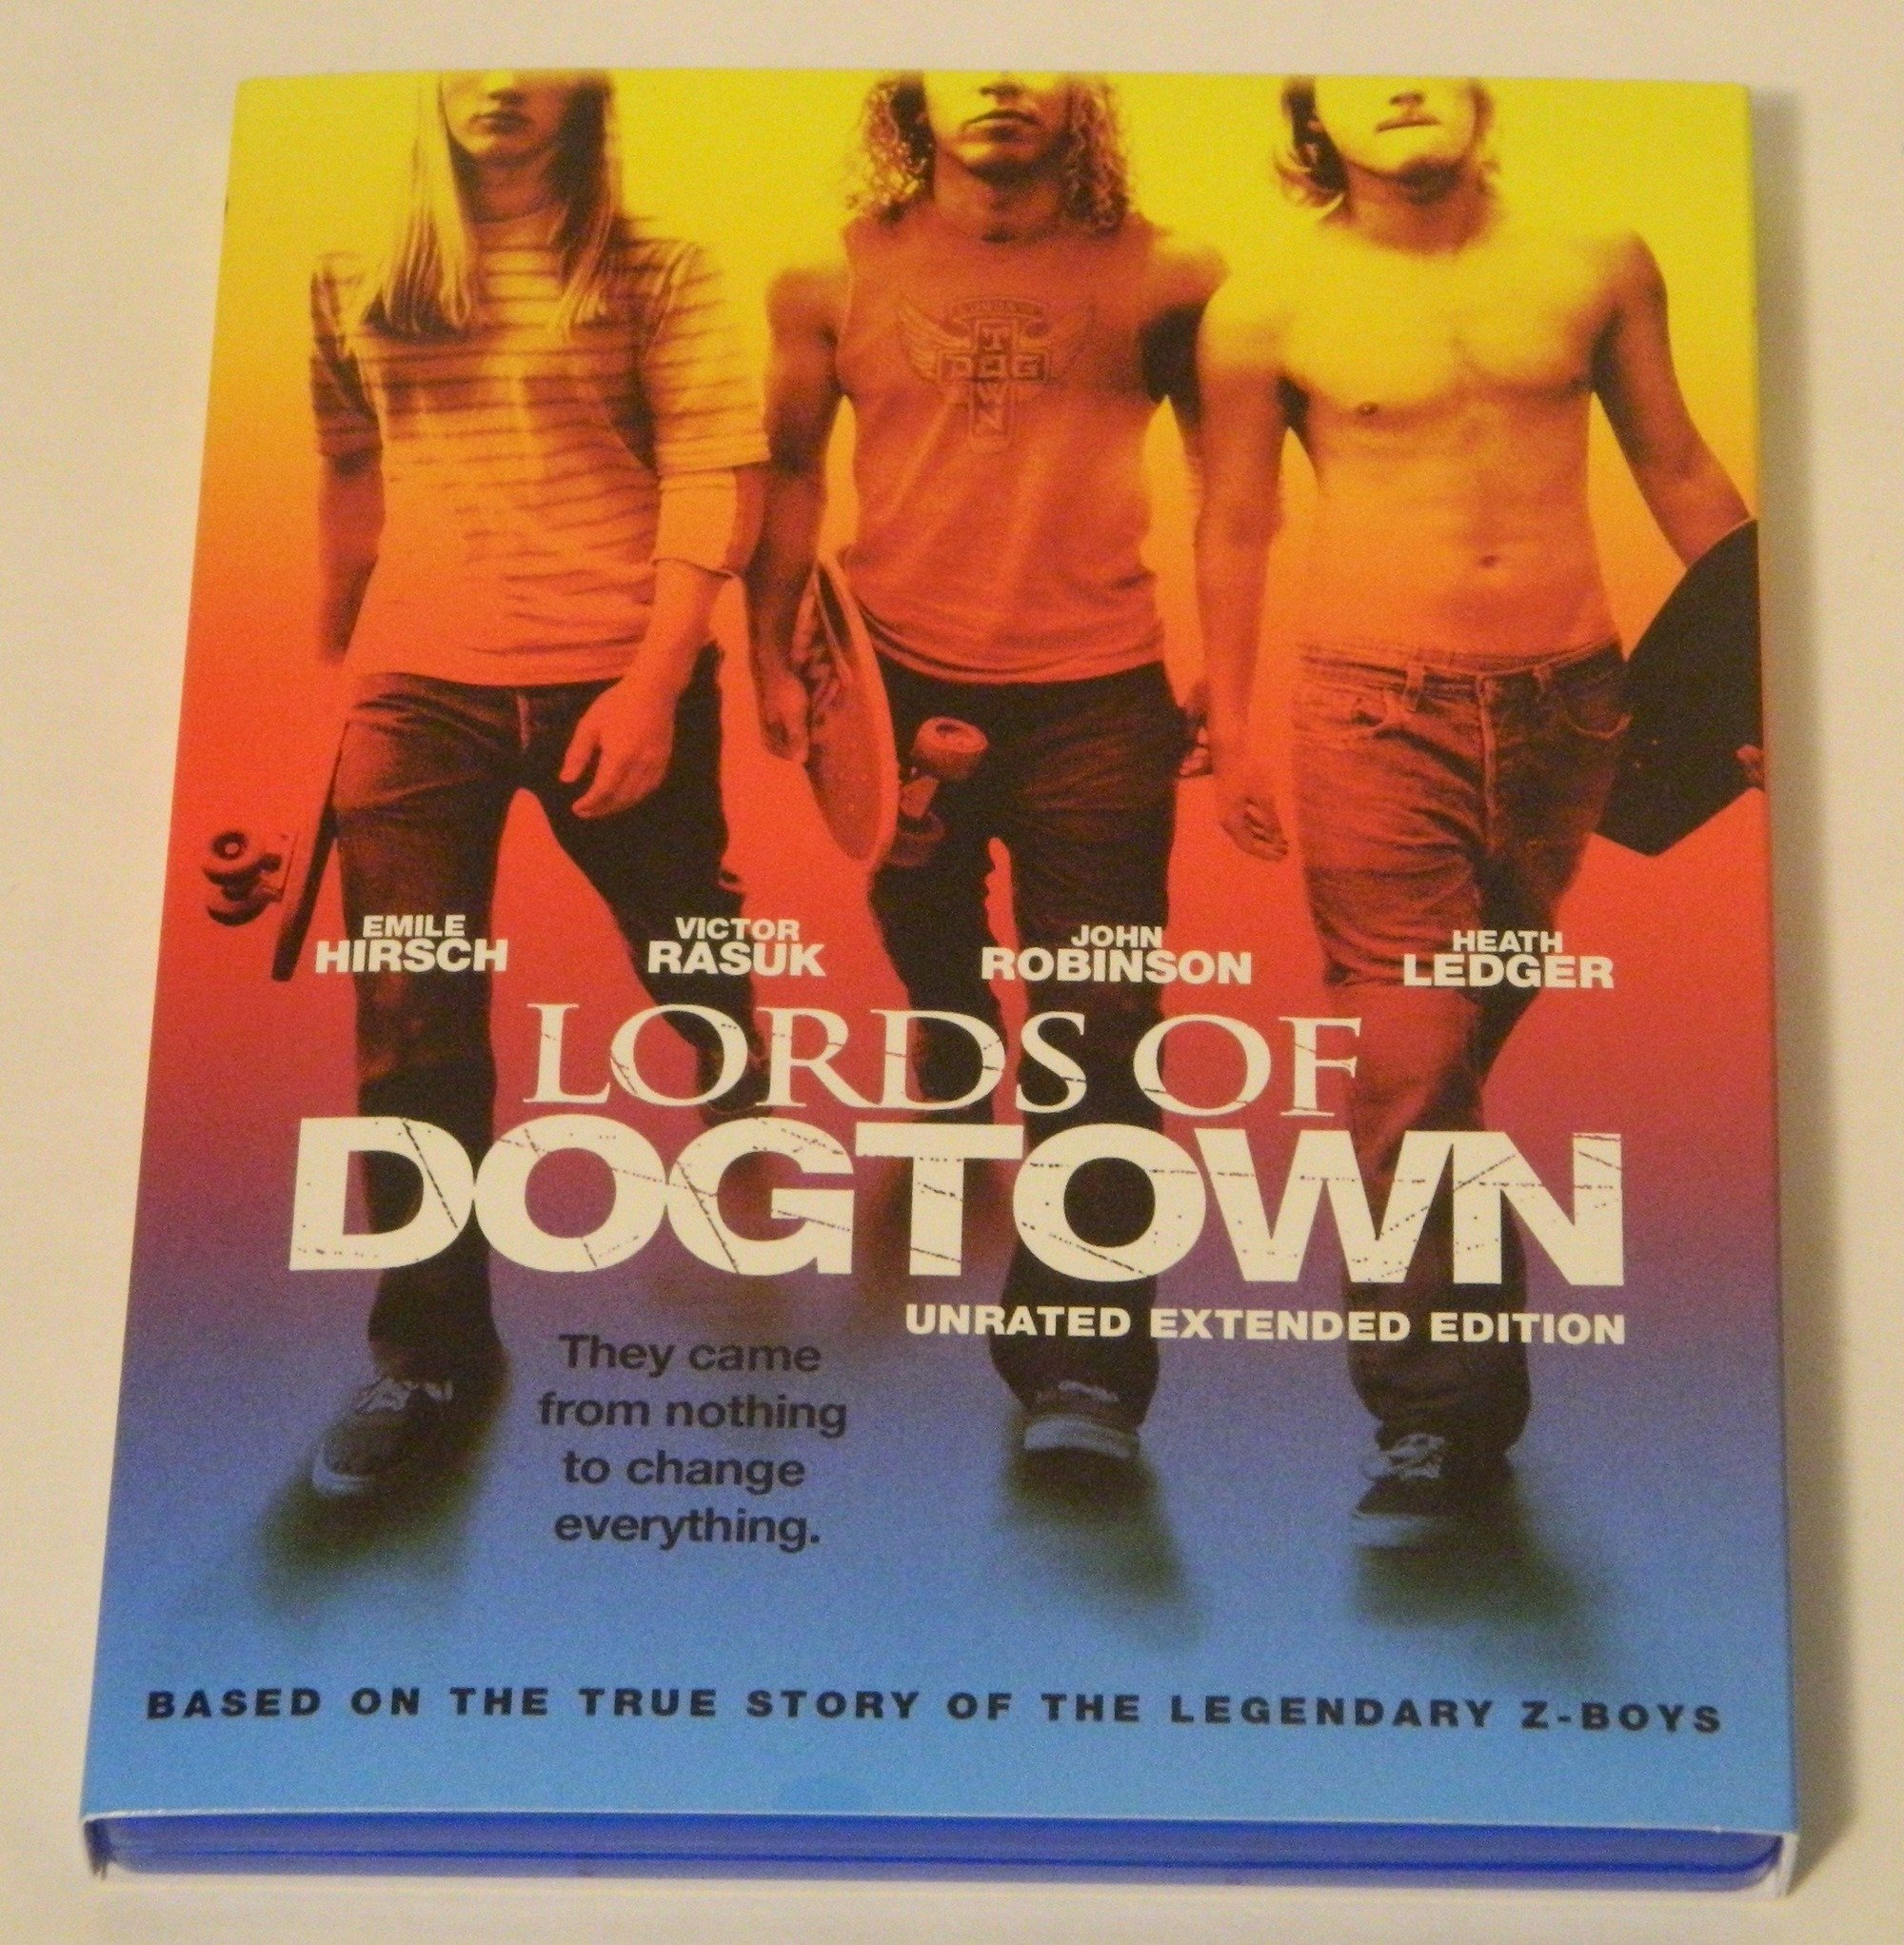 Lords of Dogtown Blu-ray Review